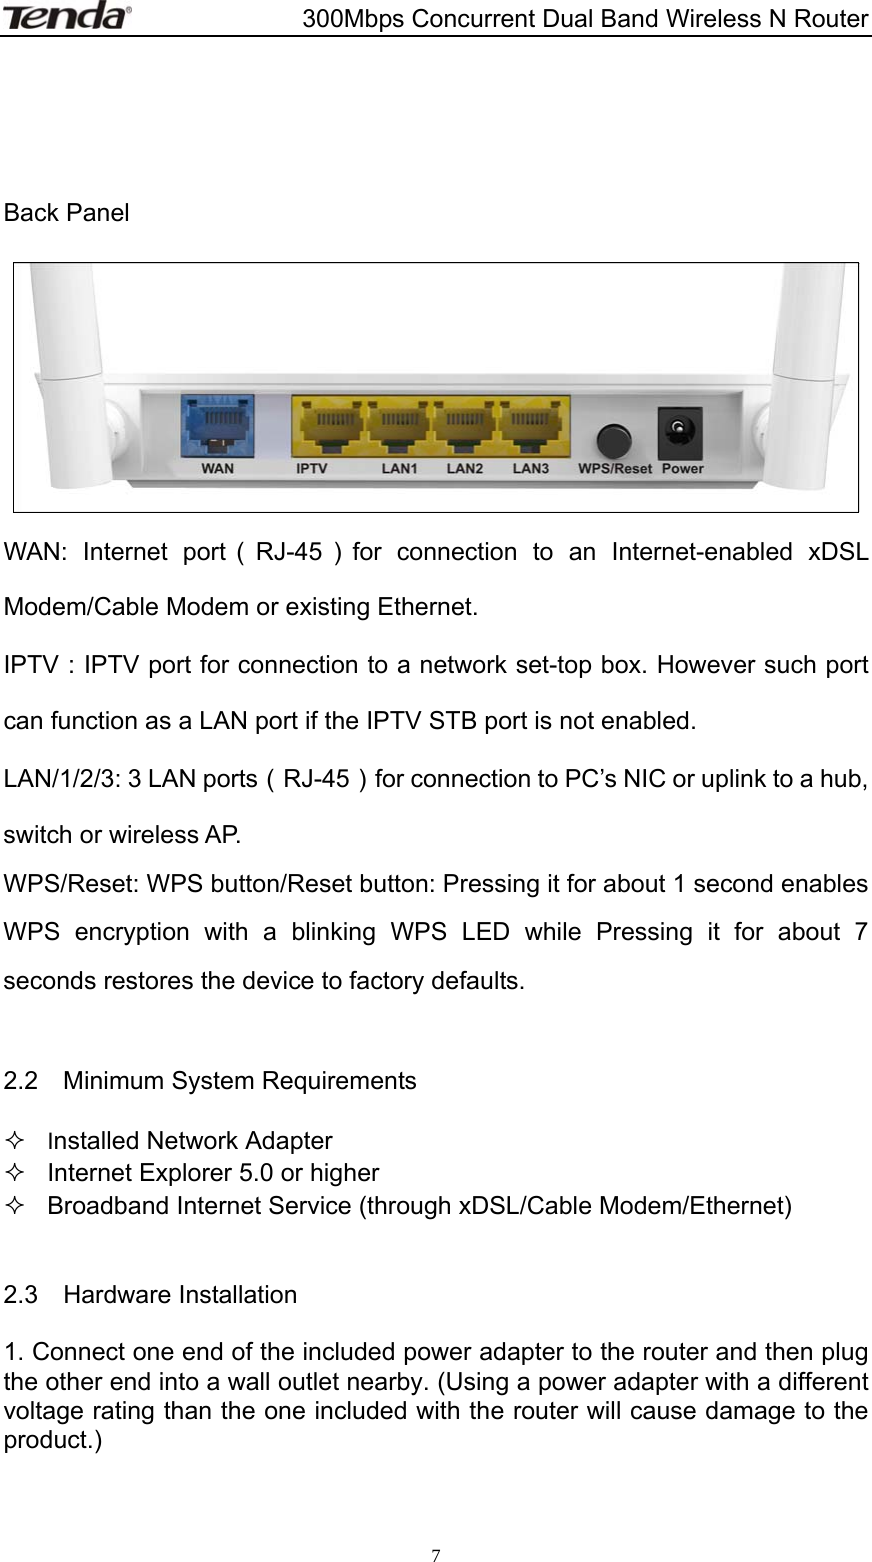                       300Mbps Concurrent Dual Band Wireless N Router  7    Back Panel   WAN: Internet port（RJ-45）for connection to an Internet-enabled xDSL Modem/Cable Modem or existing Ethernet. IPTV：IPTV port for connection to a network set-top box. However such port can function as a LAN port if the IPTV STB port is not enabled. LAN/1/2/3: 3 LAN ports （RJ-45）  for connection to PC’s NIC or uplink to a hub, switch or wireless AP. WPS/Reset: WPS button/Reset button: Pressing it for about 1 second enables WPS encryption with a blinking WPS LED while Pressing it for about 7 seconds restores the device to factory defaults.  2.2  Minimum System Requirements  Installed Network Adapter   Internet Explorer 5.0 or higher   Broadband Internet Service (through xDSL/Cable Modem/Ethernet)  2.3  Hardware Installation 1. Connect one end of the included power adapter to the router and then plug the other end into a wall outlet nearby. (Using a power adapter with a different voltage rating than the one included with the router will cause damage to the product.)   